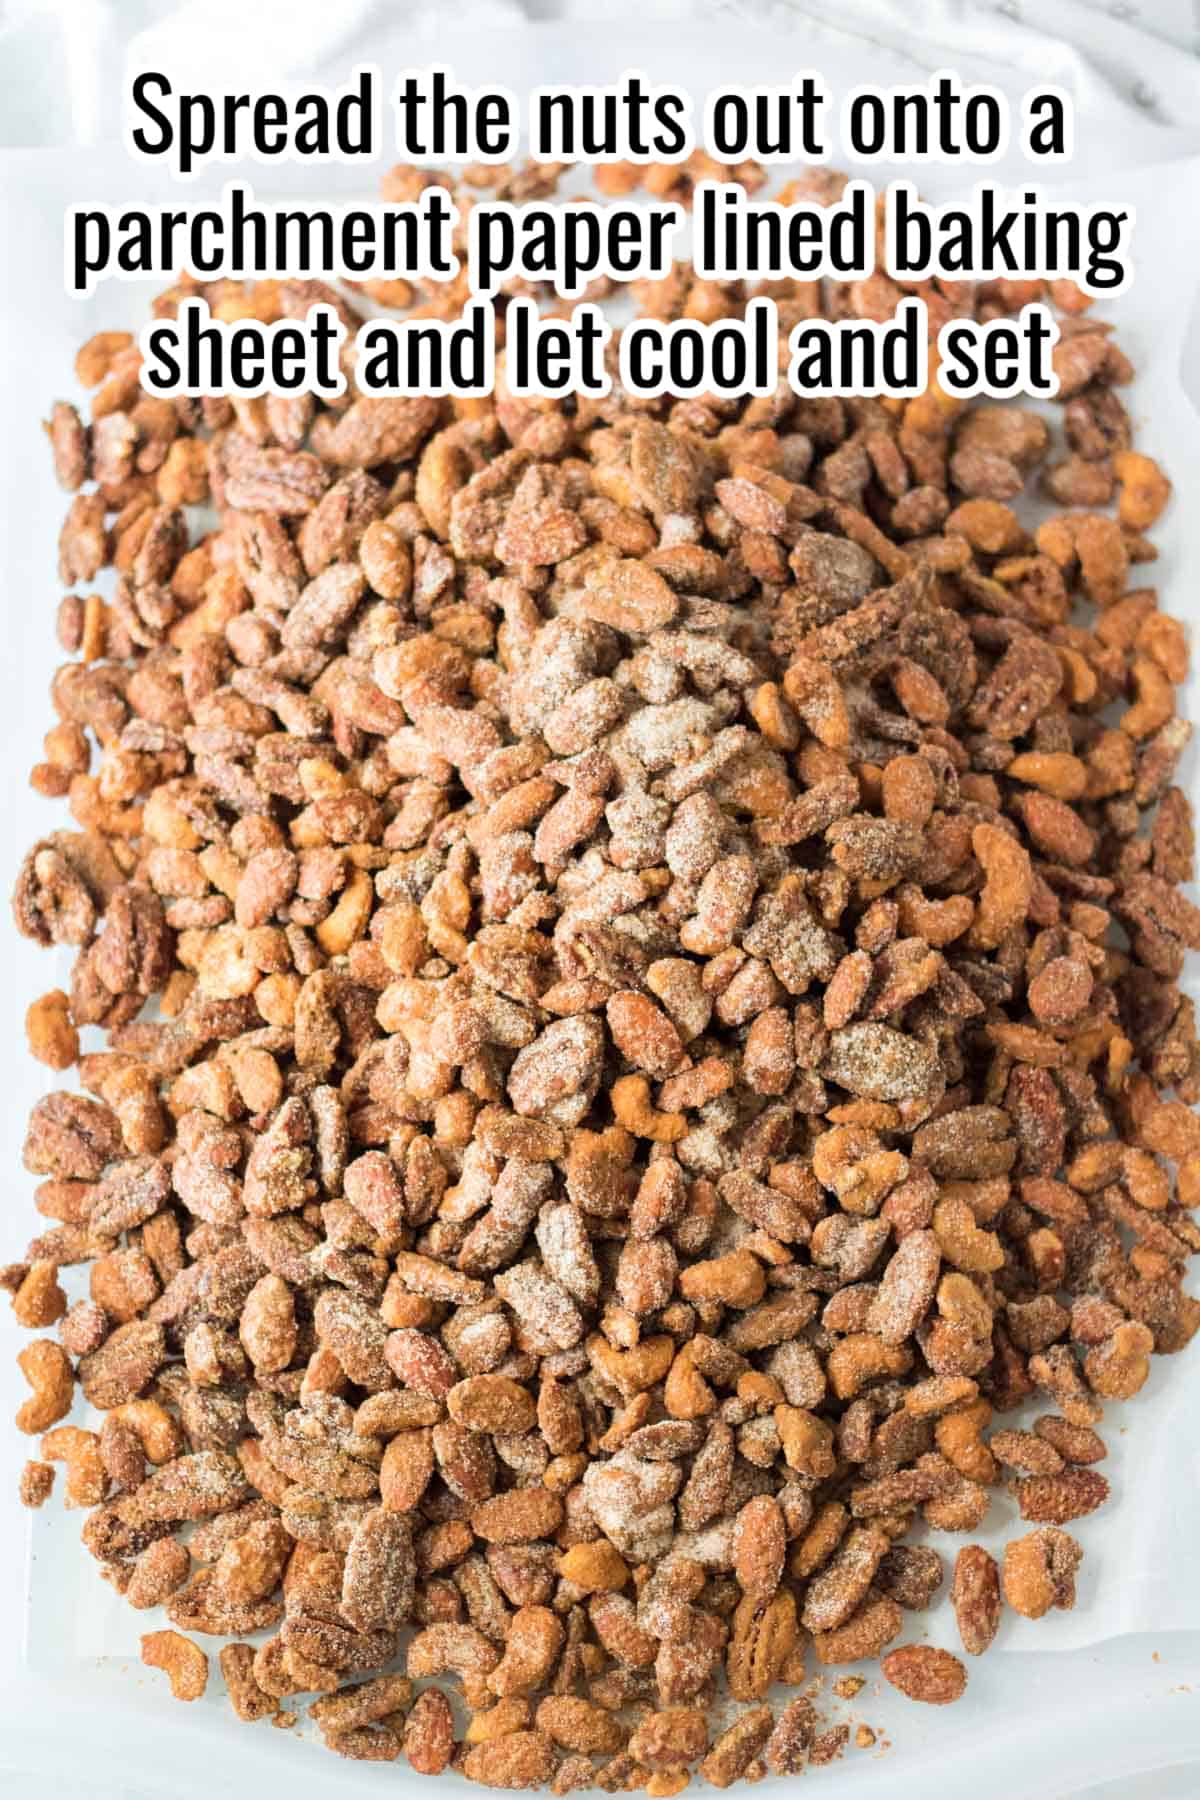 cooled candied nuts on a baking sheet with instructions overlaid in text.